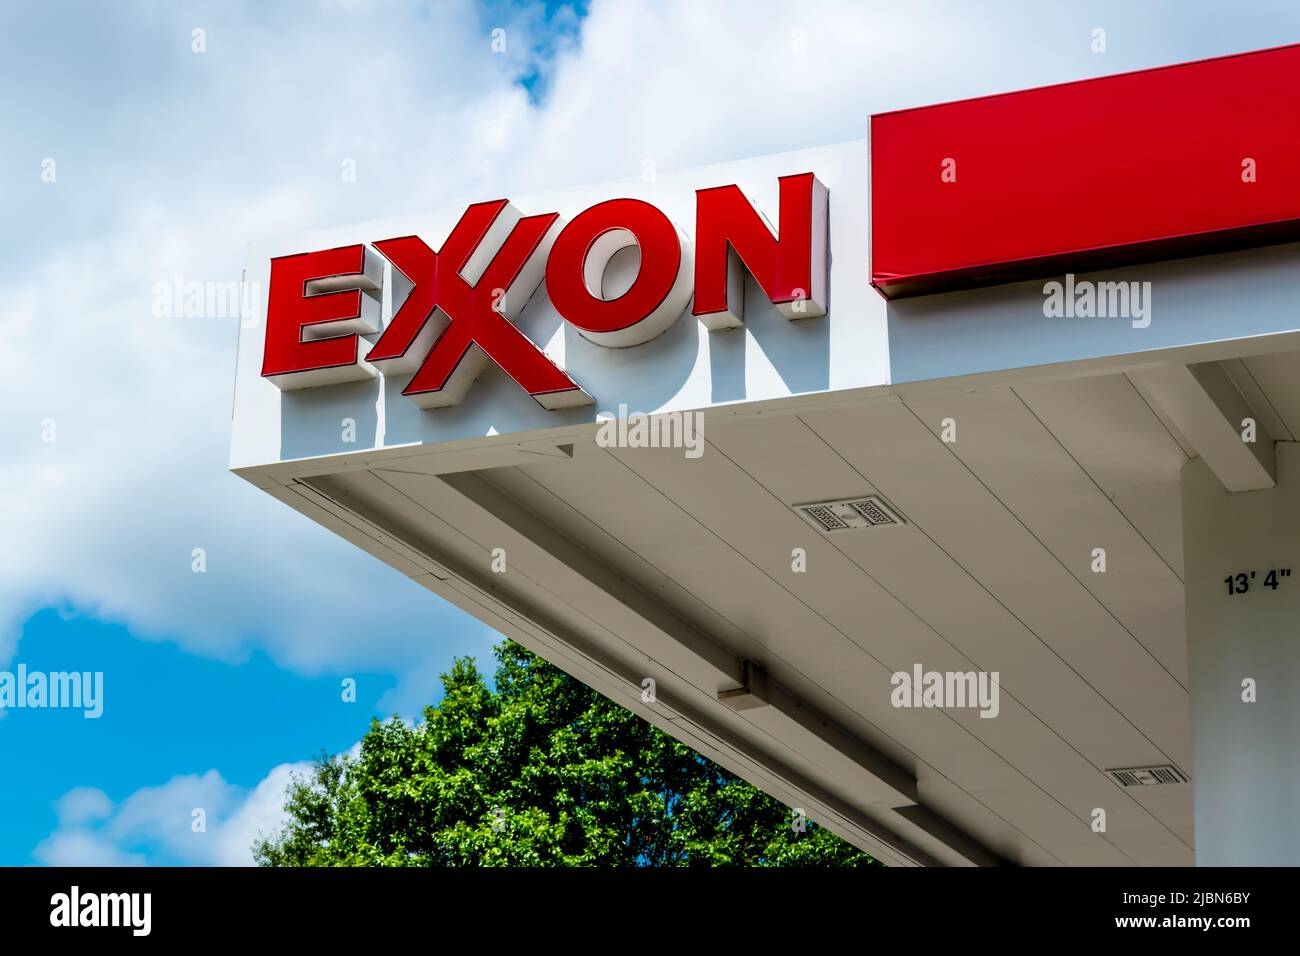 Exxon gas station's outdoor facade brand and logo signage in red letters on white against a blue sky with white clouds in southwest Charlotte, NC. Stock Photo